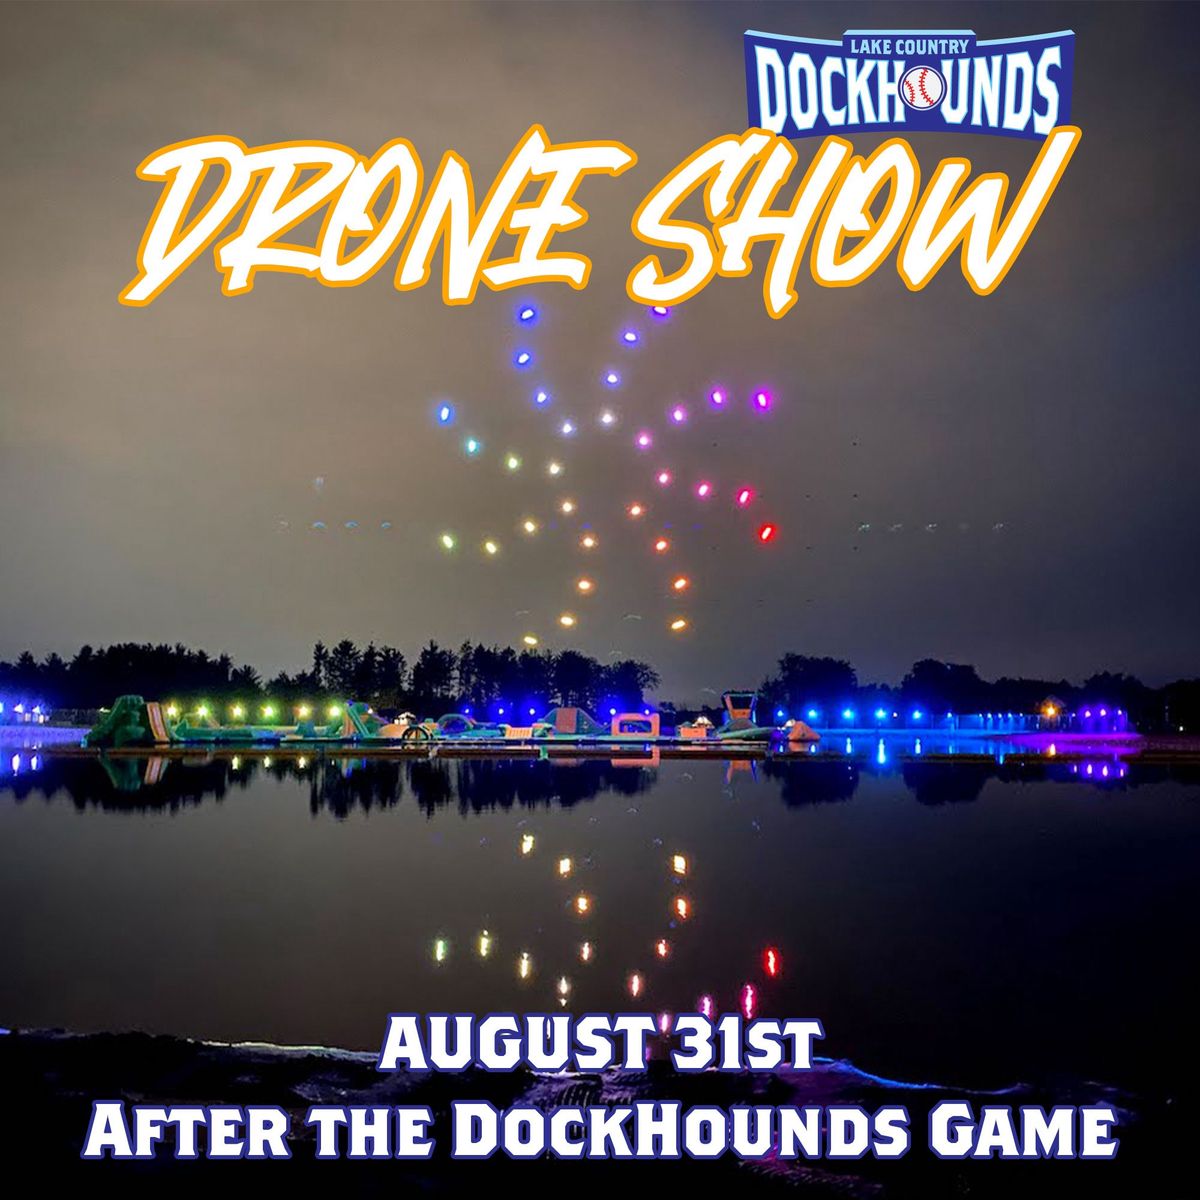 DockHounds with Postgame Drone Show